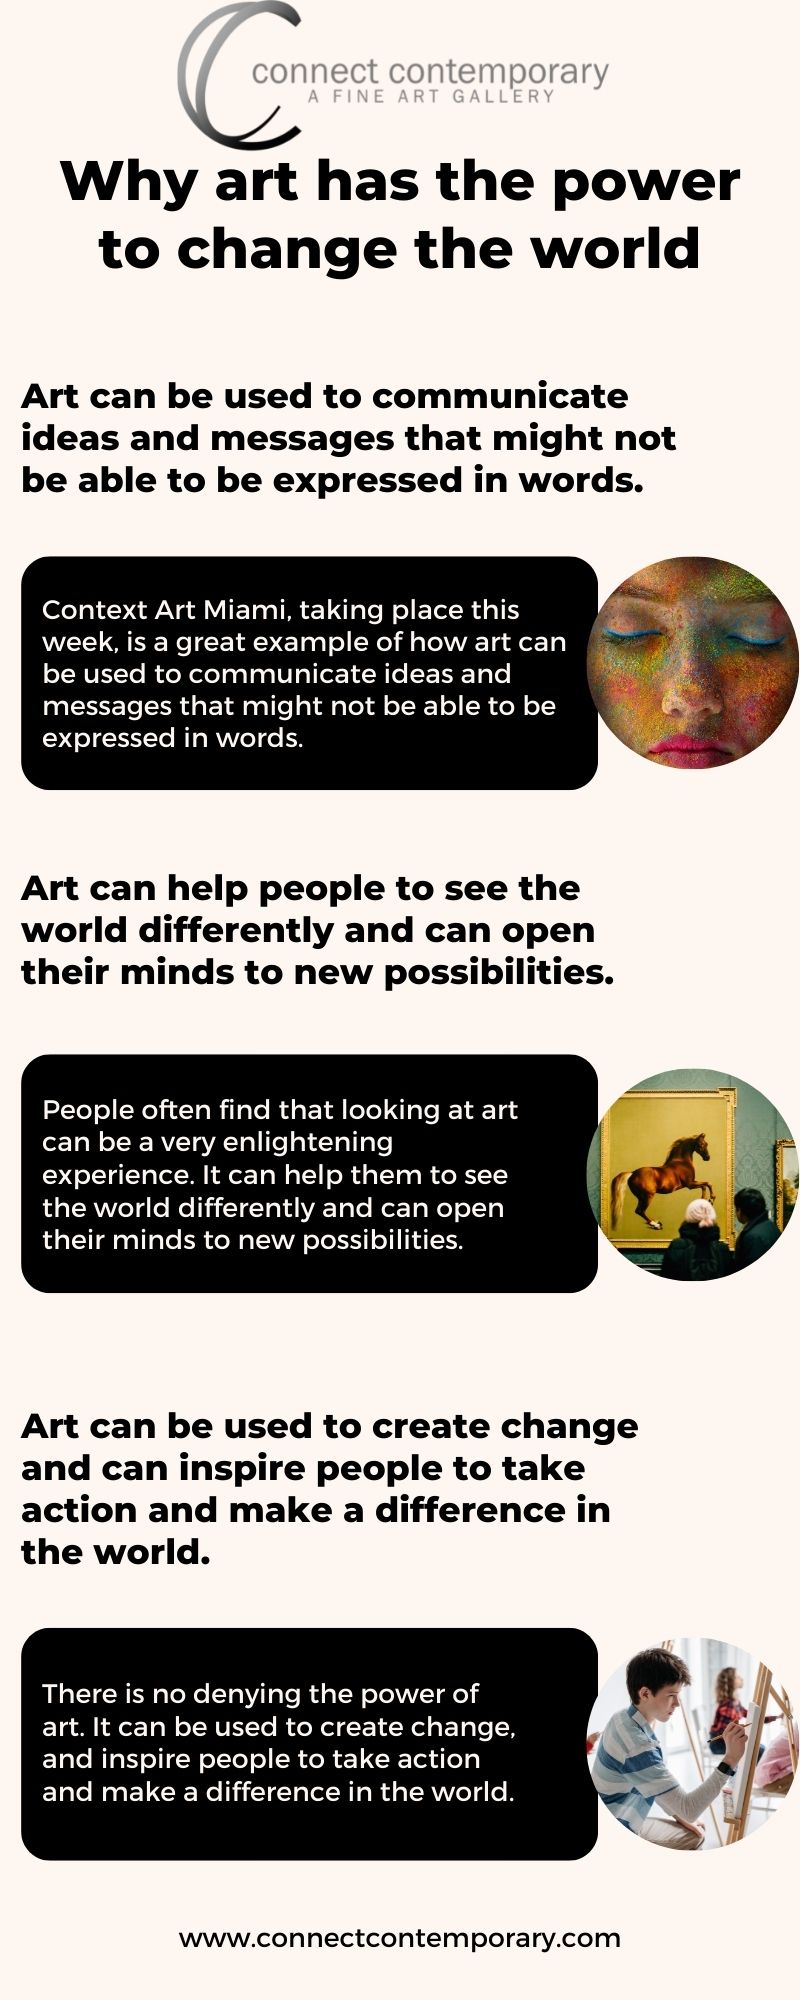 Why Art Has The Power To Change The World